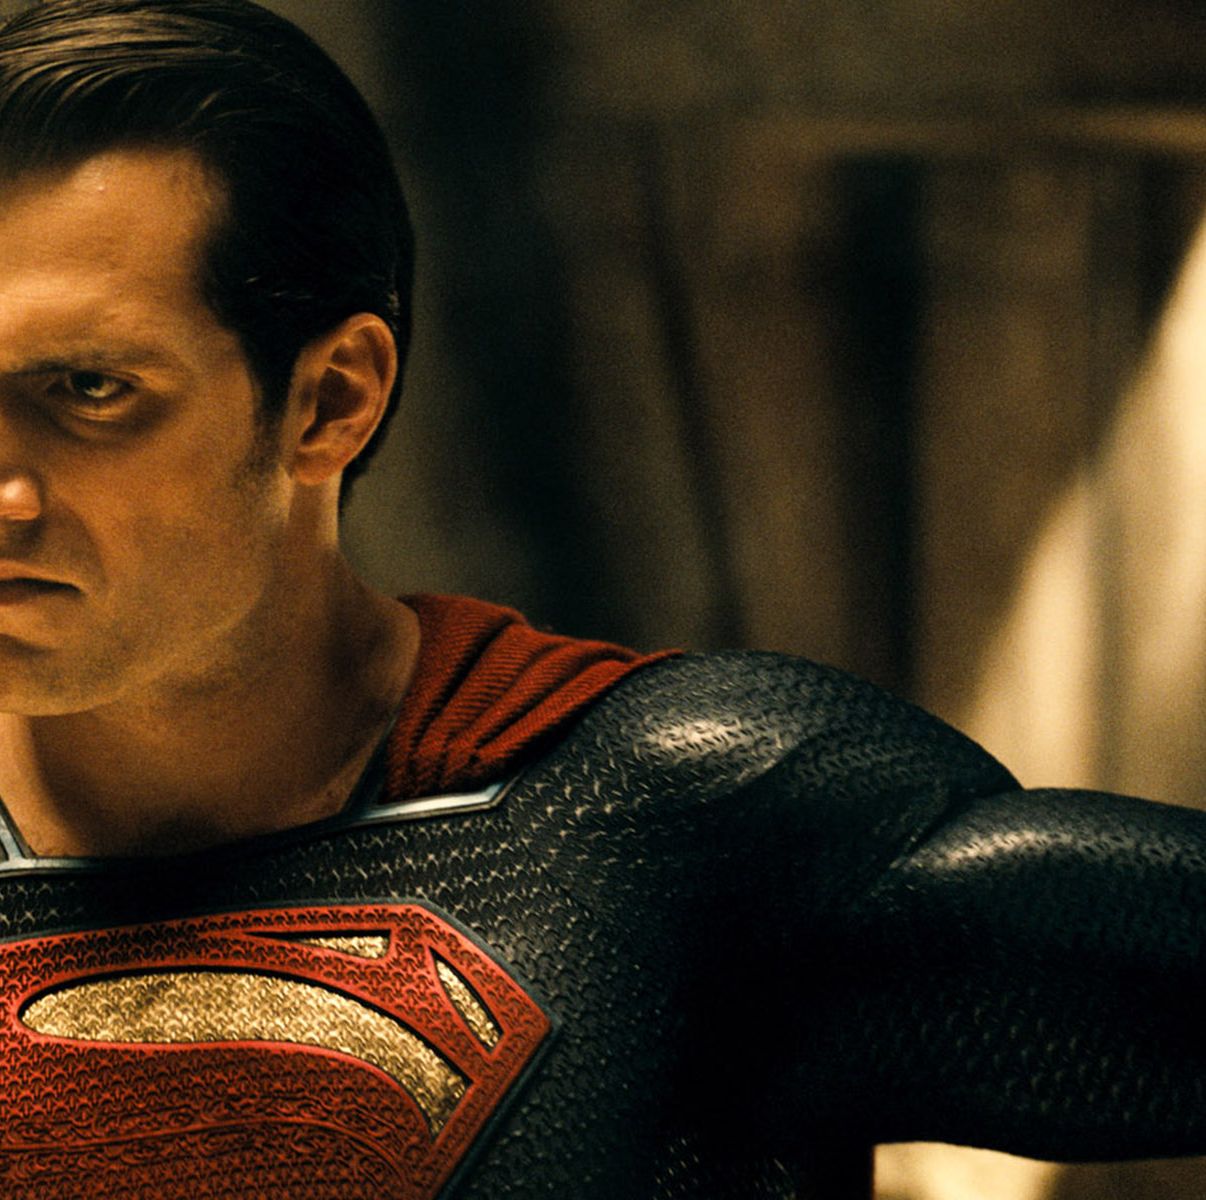 Henry Cavill to reprise Superman role in 'Man of Steel 2': manager